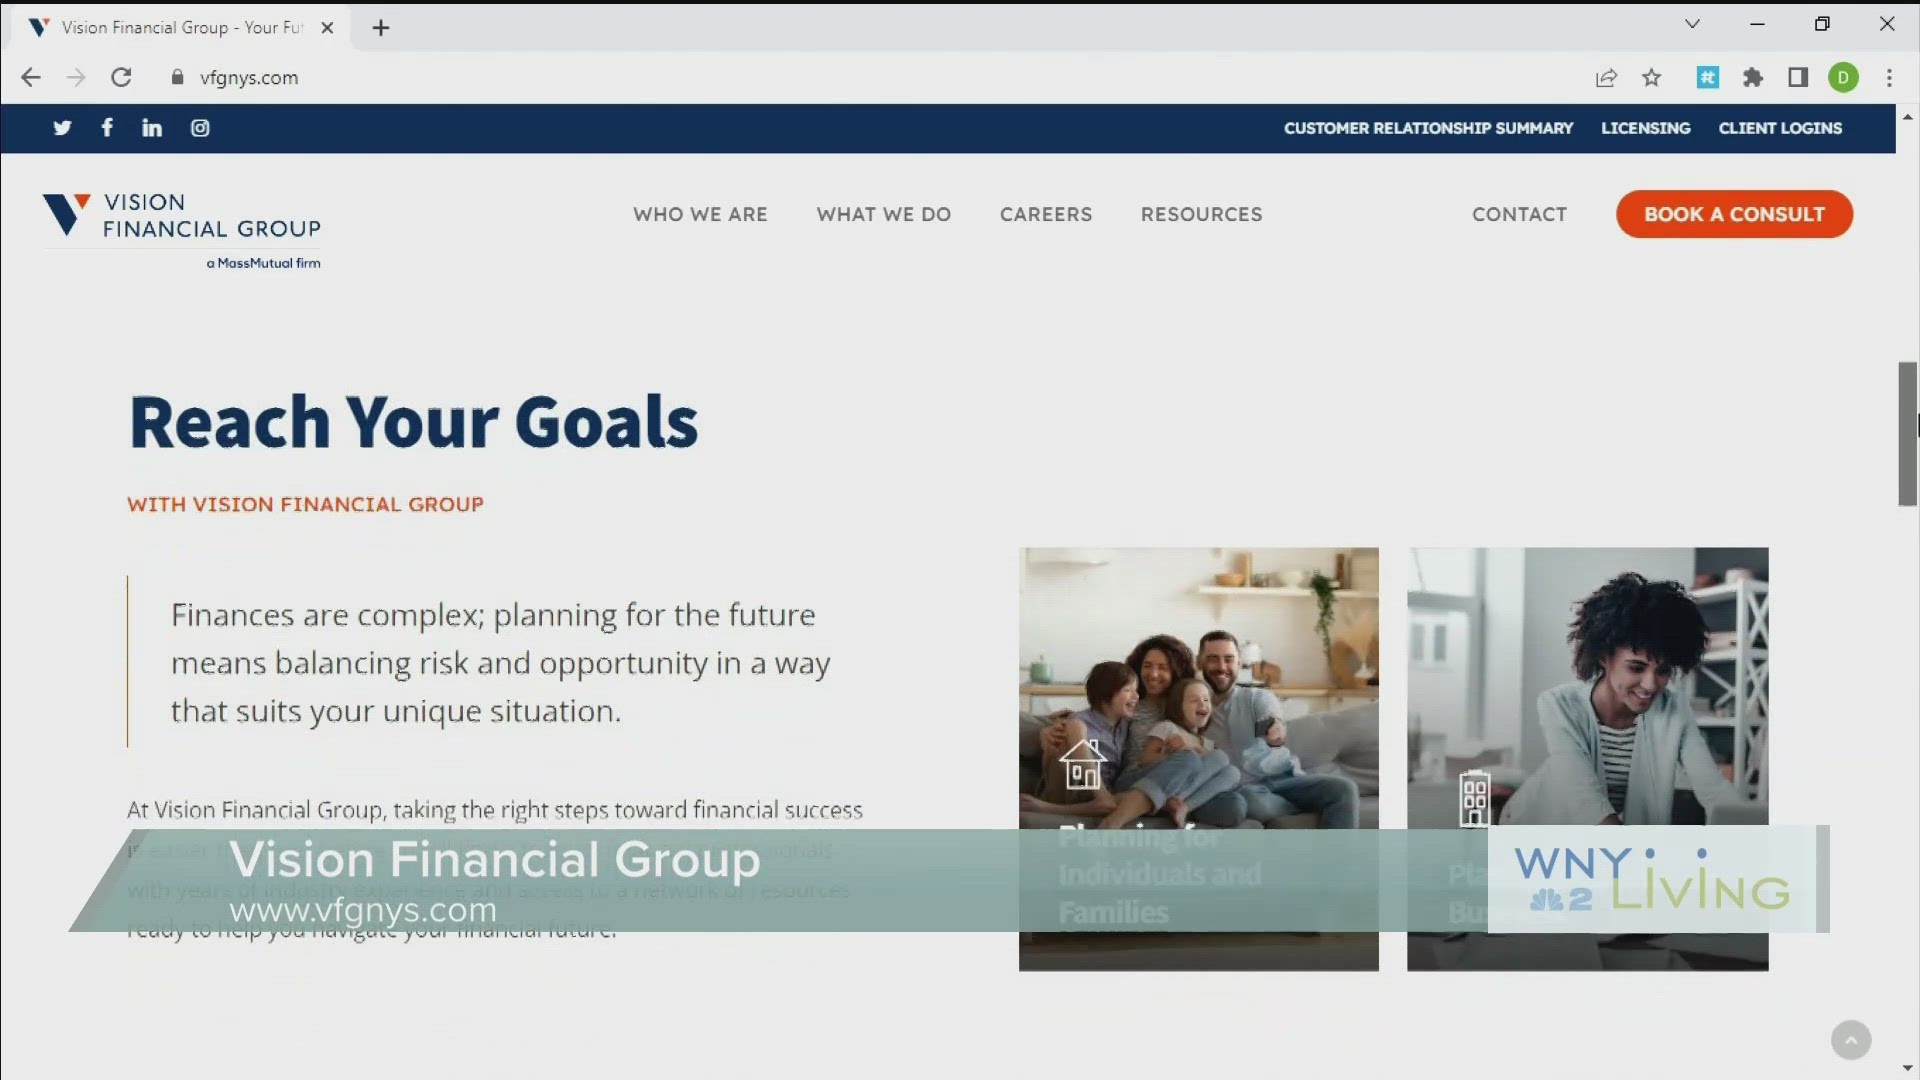 WNY Living - March 18th - Vision Financial Group - THIS VIDEO IS SPONSORED BY VISION FINANCIAL GROUP